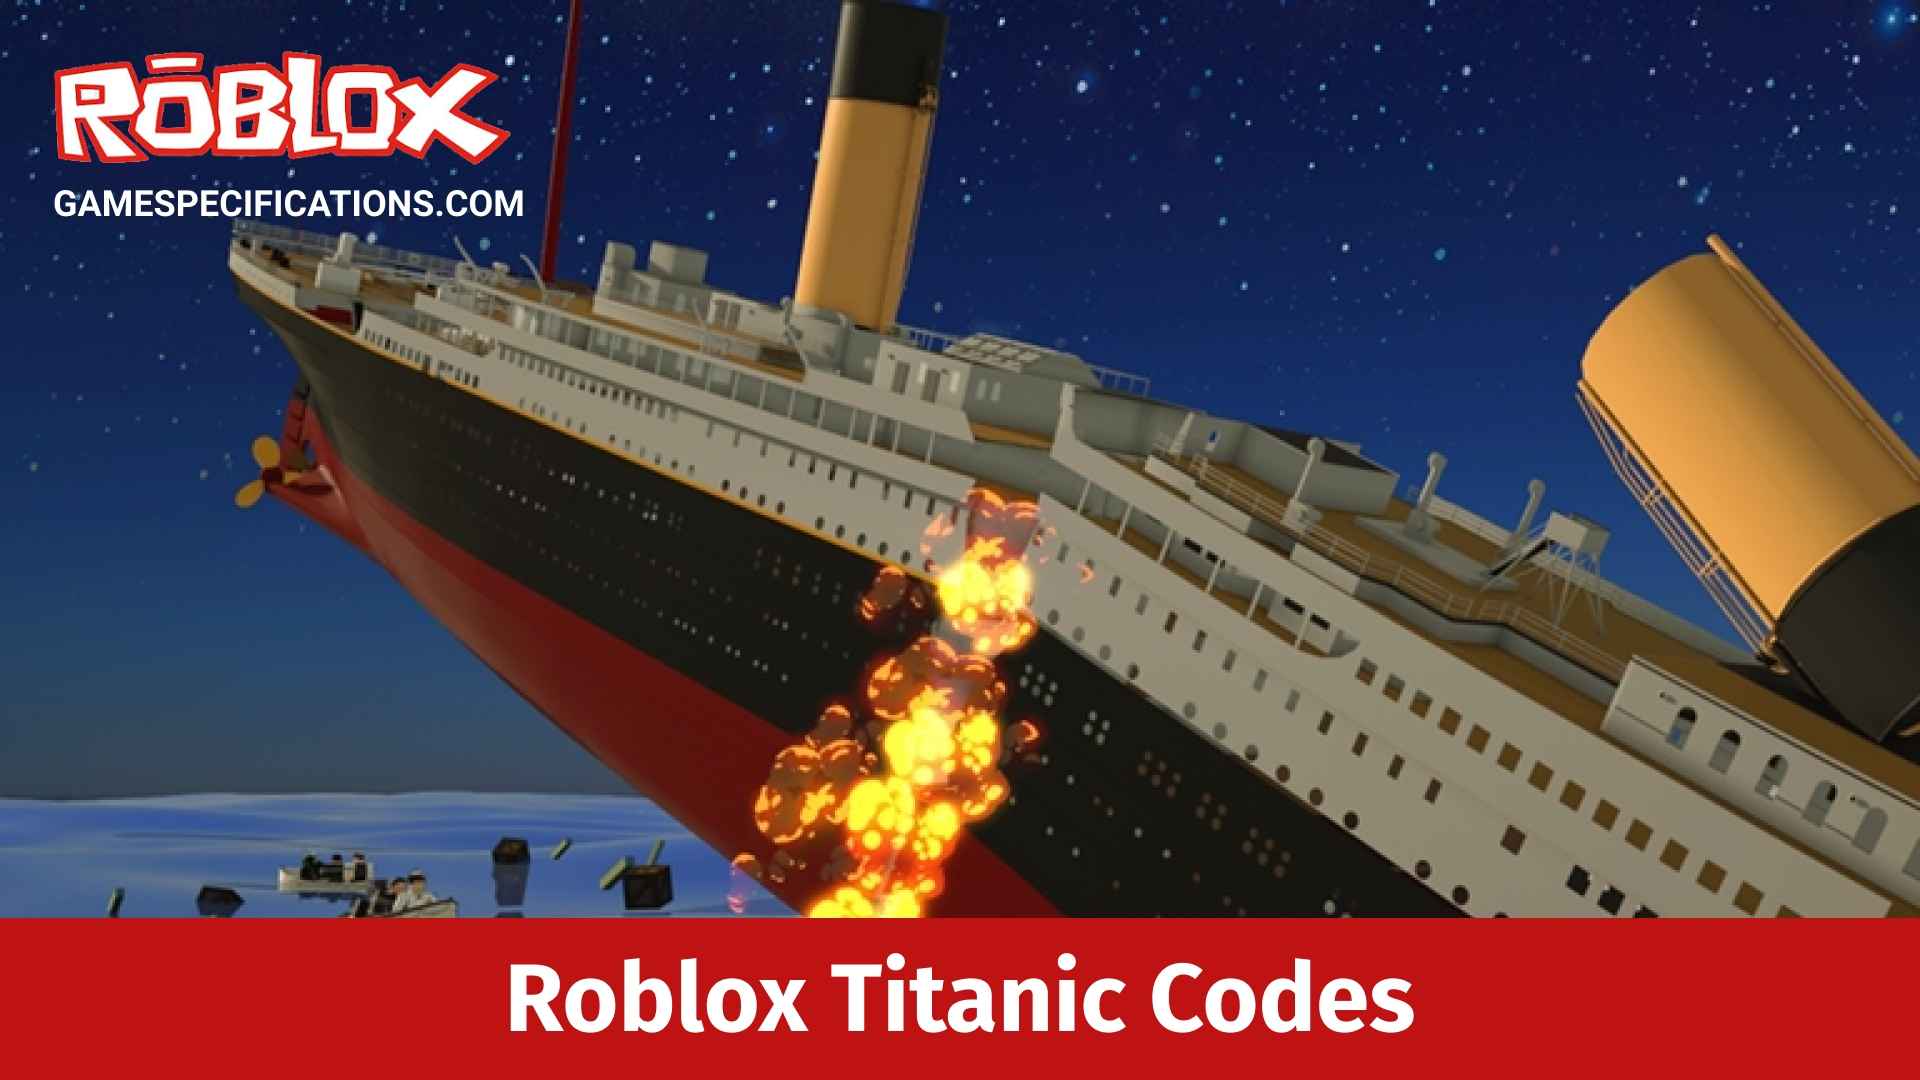 Roblox Titanic Codes July 2021 Game Specifications - roblox survive the sinking ship